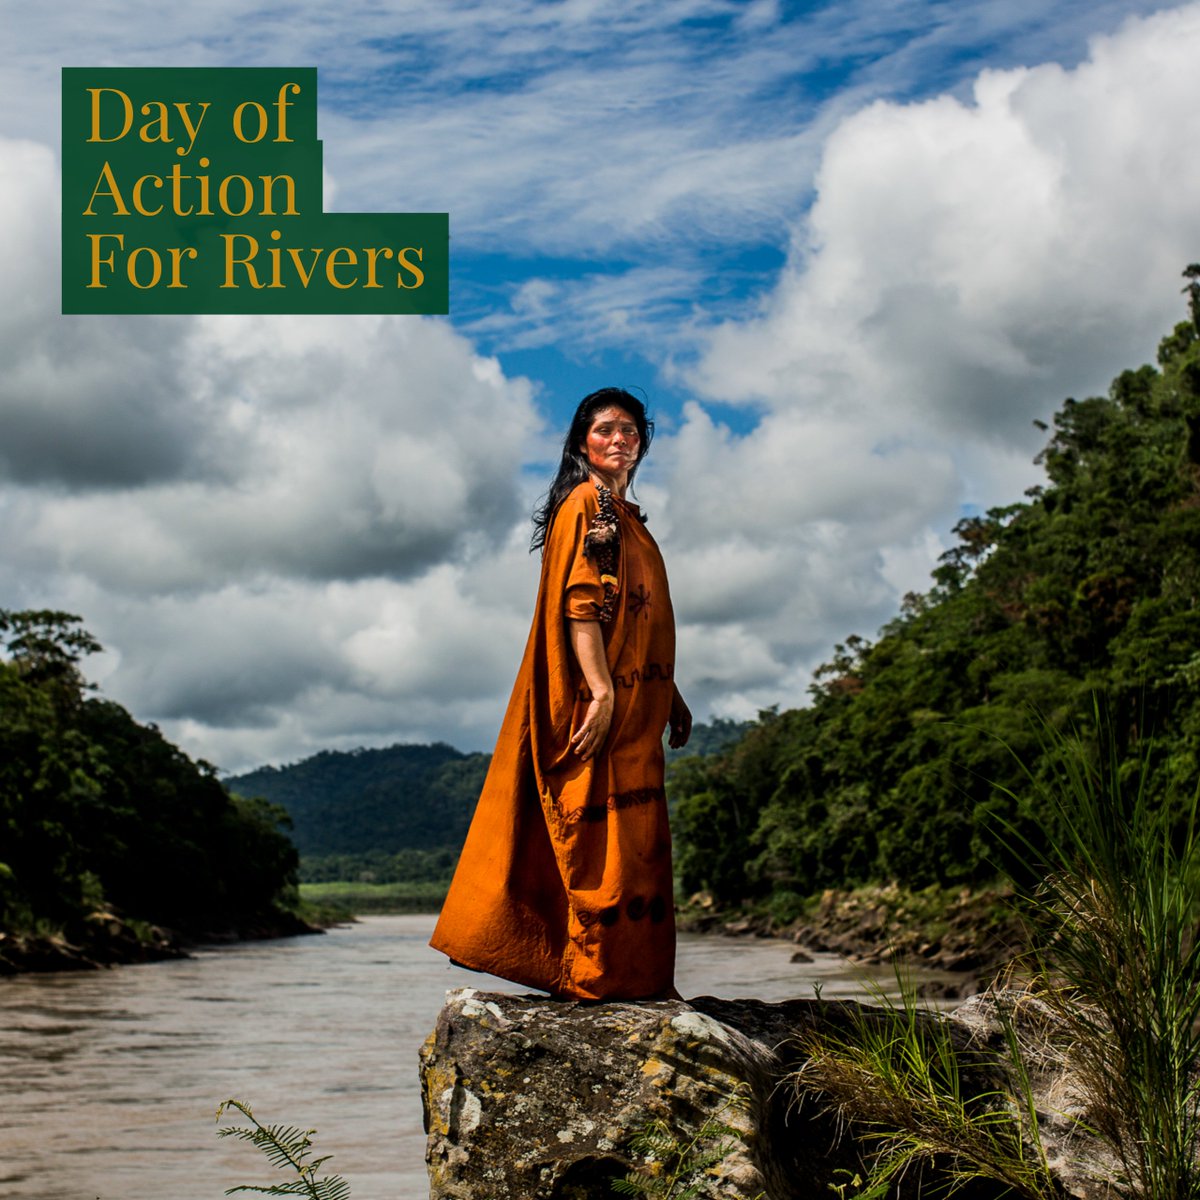 In honor of #WomensHistoryMonth and #DayofActionForRivers, we're celebrating five #GoldmanPrize women river defenders from around the world. Read their stories: bit.ly/2pc9Fa7 #womensday #IWD2018 #RiversUniteUs